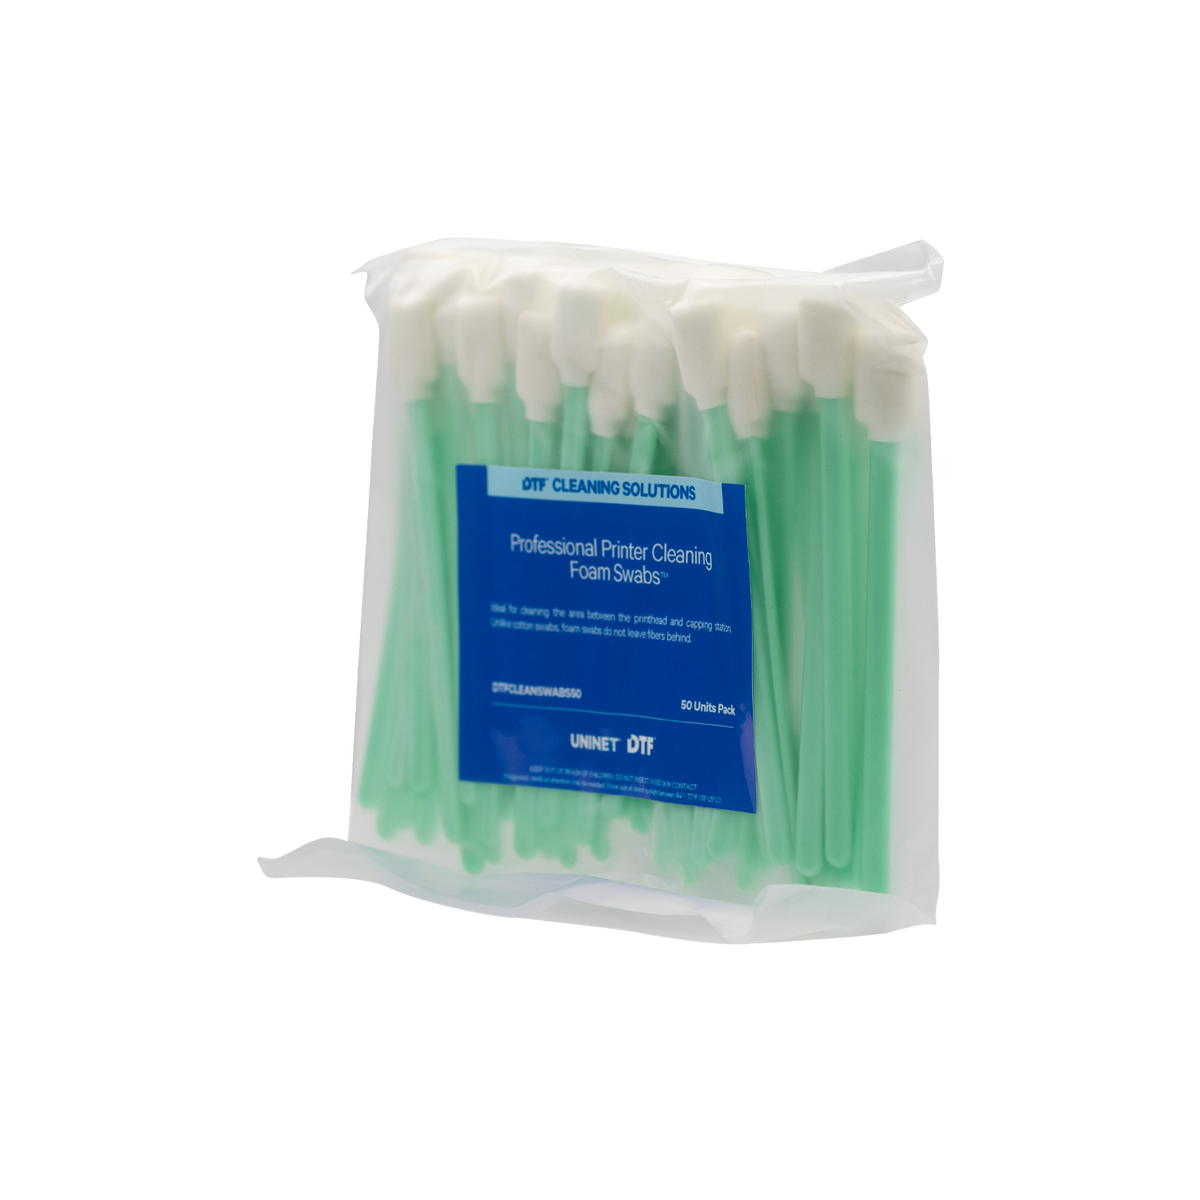 DTF Professional Printer Cleaning Foam Swabs (50 pack)